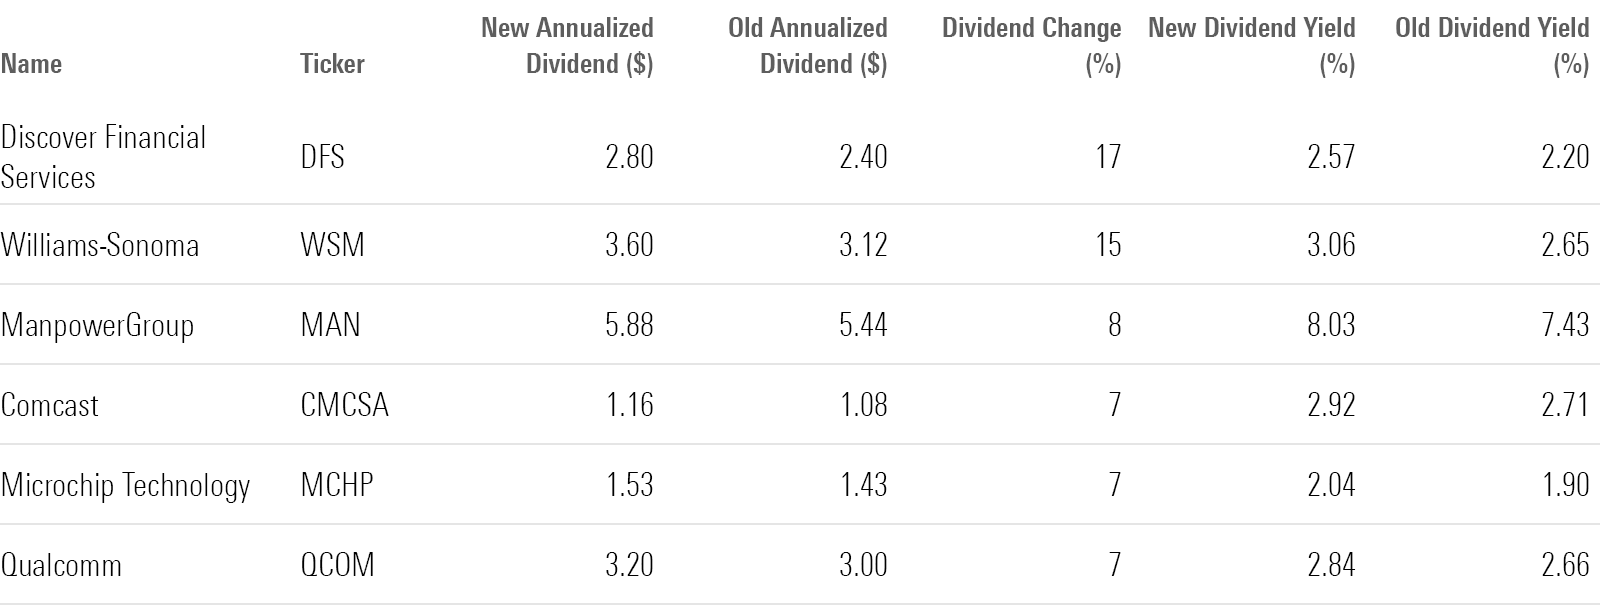 A table showing dividend changes over the course of first-quarter 2023 earnings season for Discover Financial Services, Williams-Sonama, ManpowerGroup, Comcast, Microchip Technology, and Qualcomm stocks.